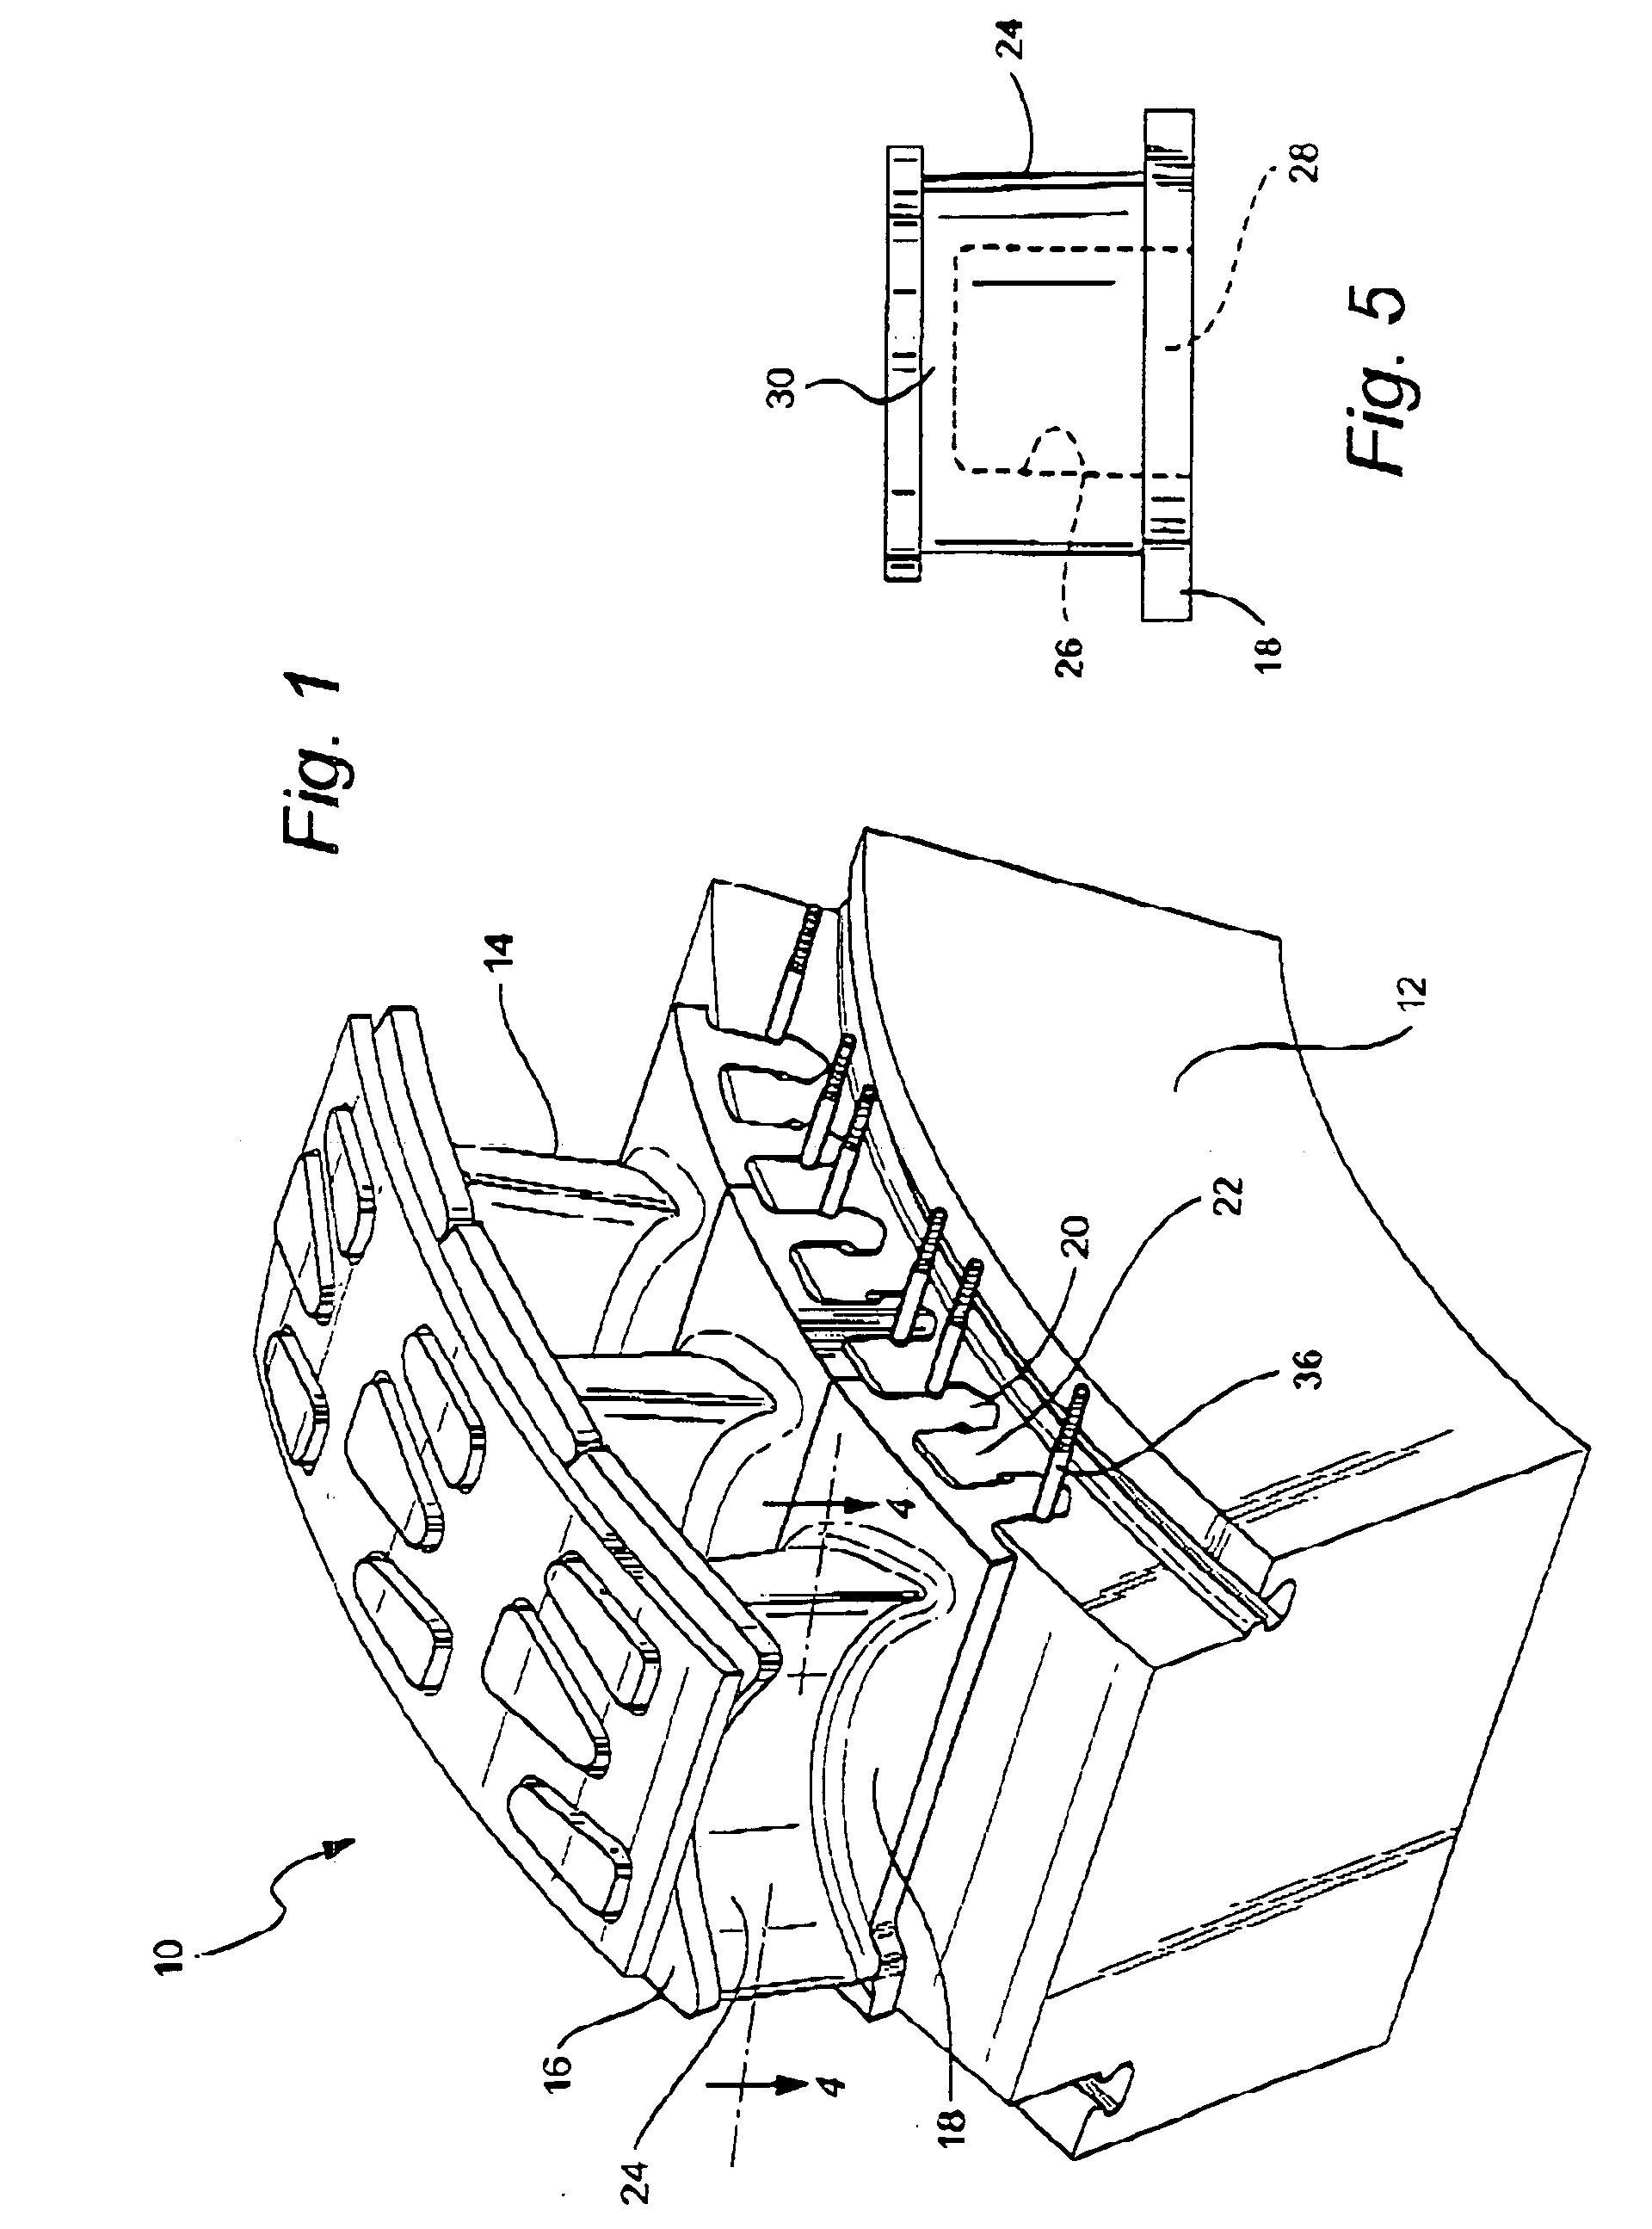 Reduced weight control stage for a high temperature steam turbine